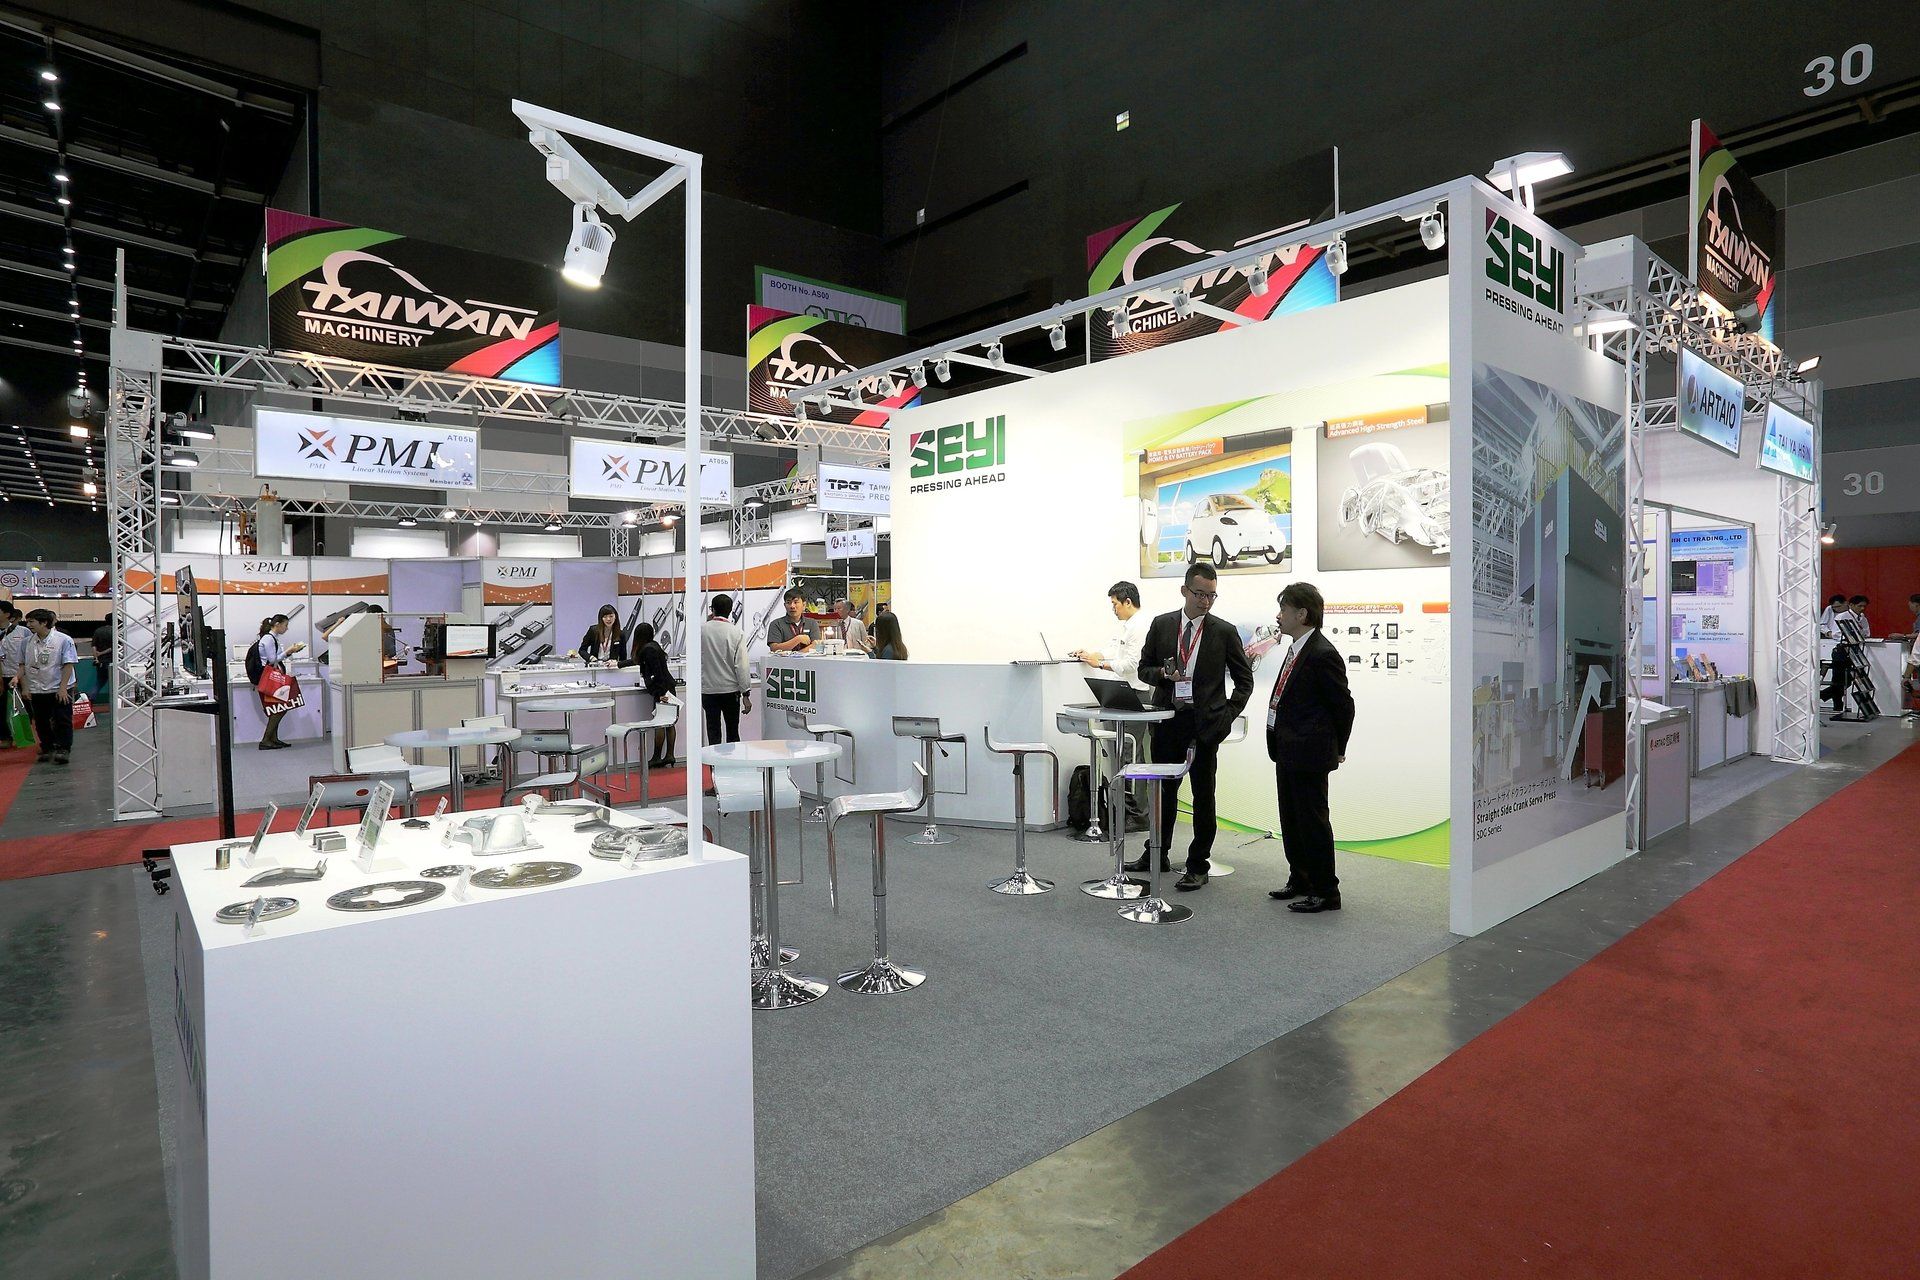 Taiwan Pavilion @ Metalex 2017. Booth designed and built by Essential Global Fairs.